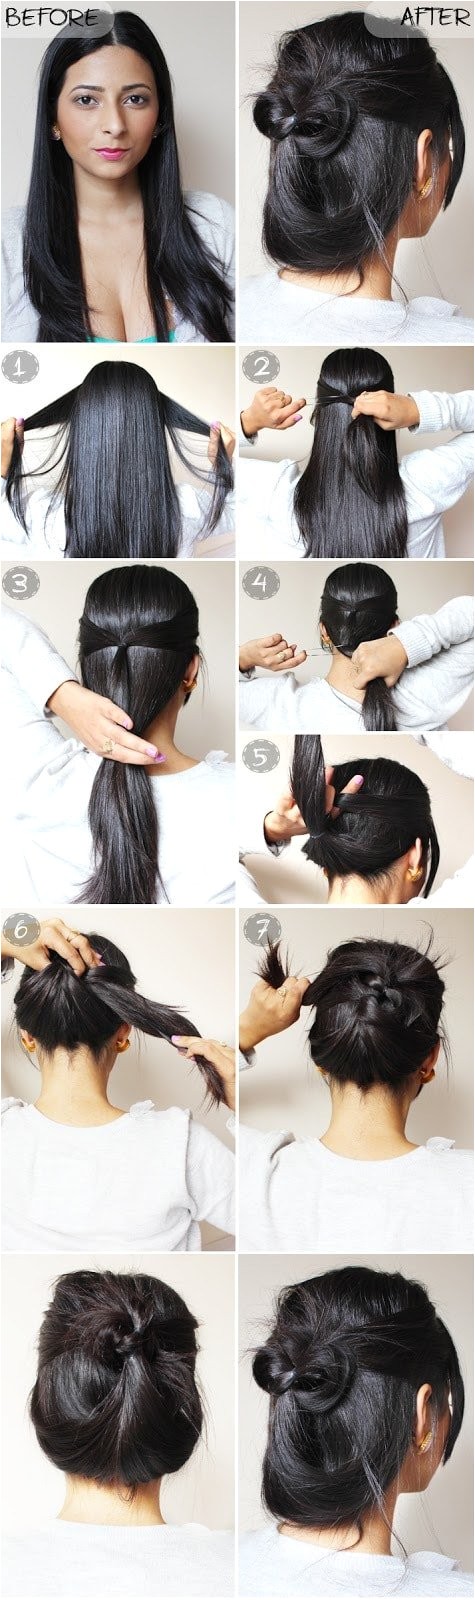 Easy Going Out Hairstyles 11 Best Diy Hairstyle Tutorials for Your Next Going Out